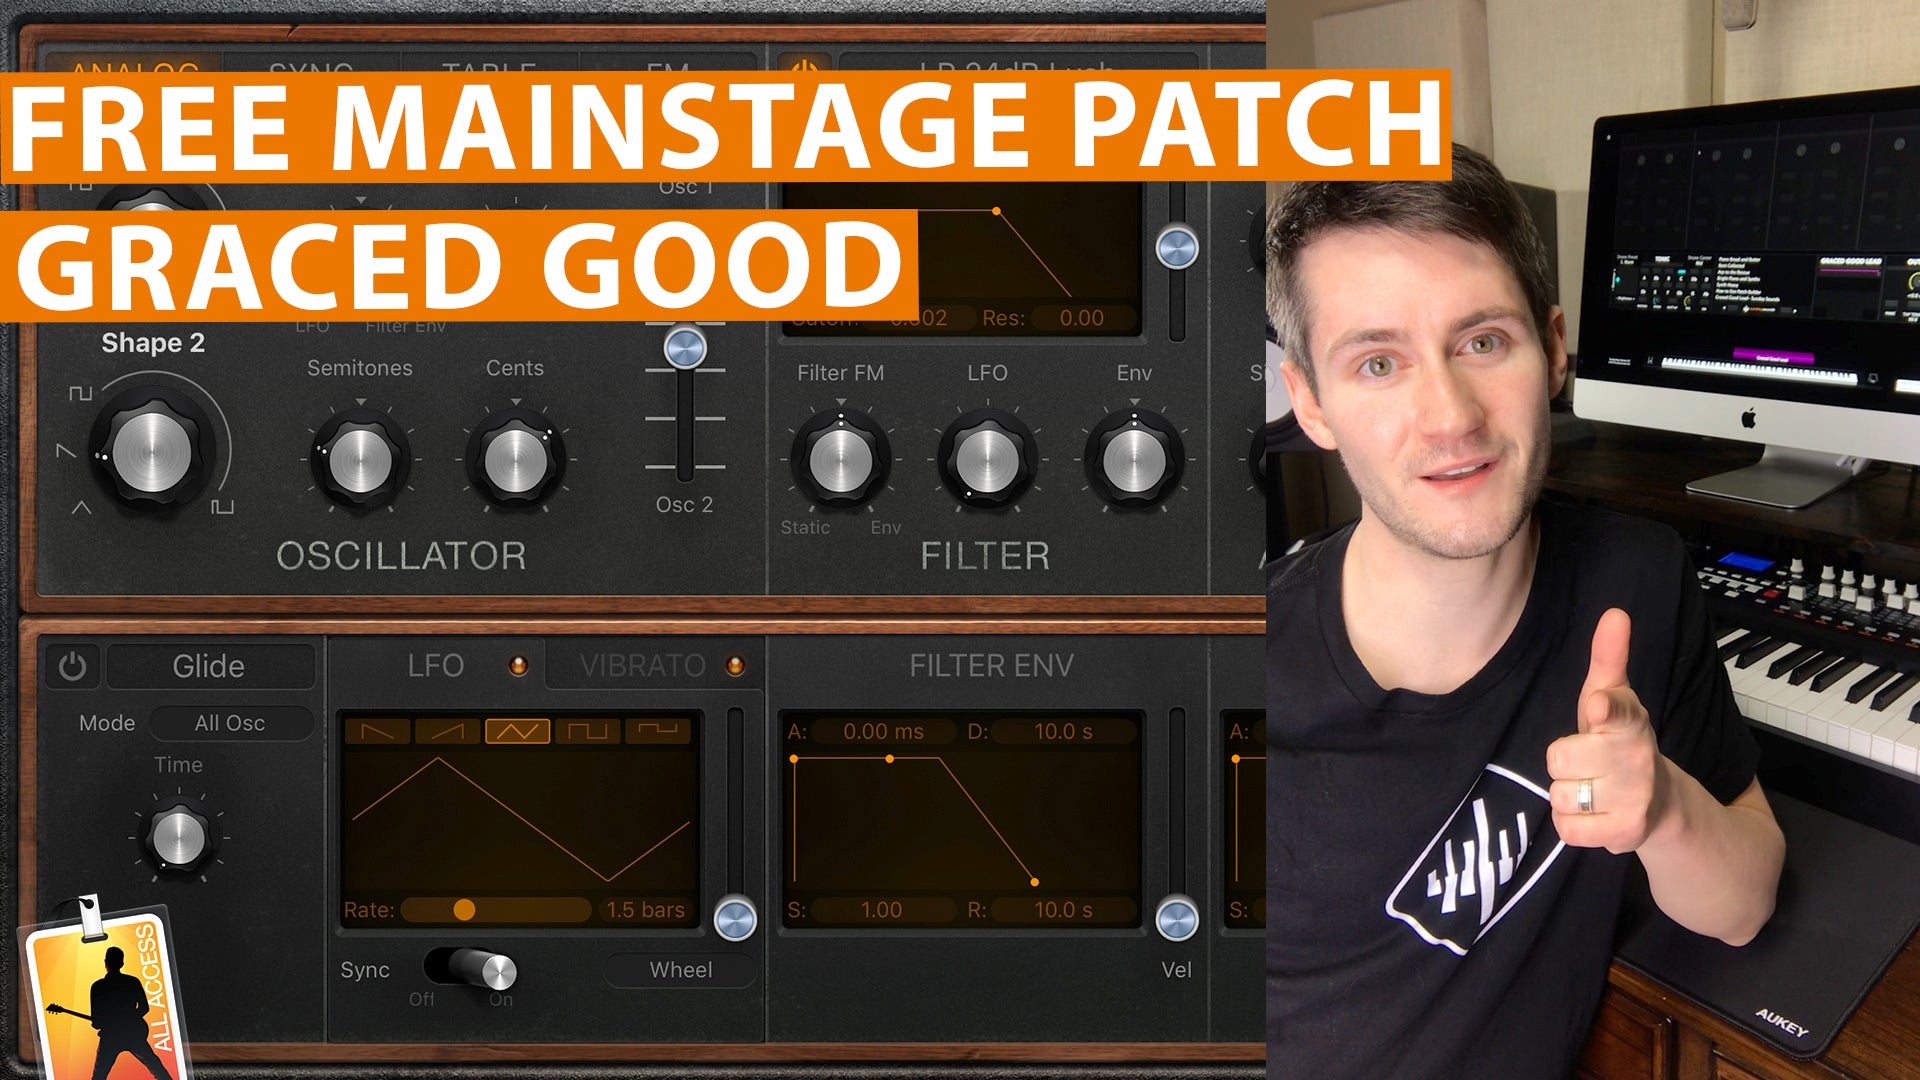 Free MainStage Worship Patch! - Graced Good Lead